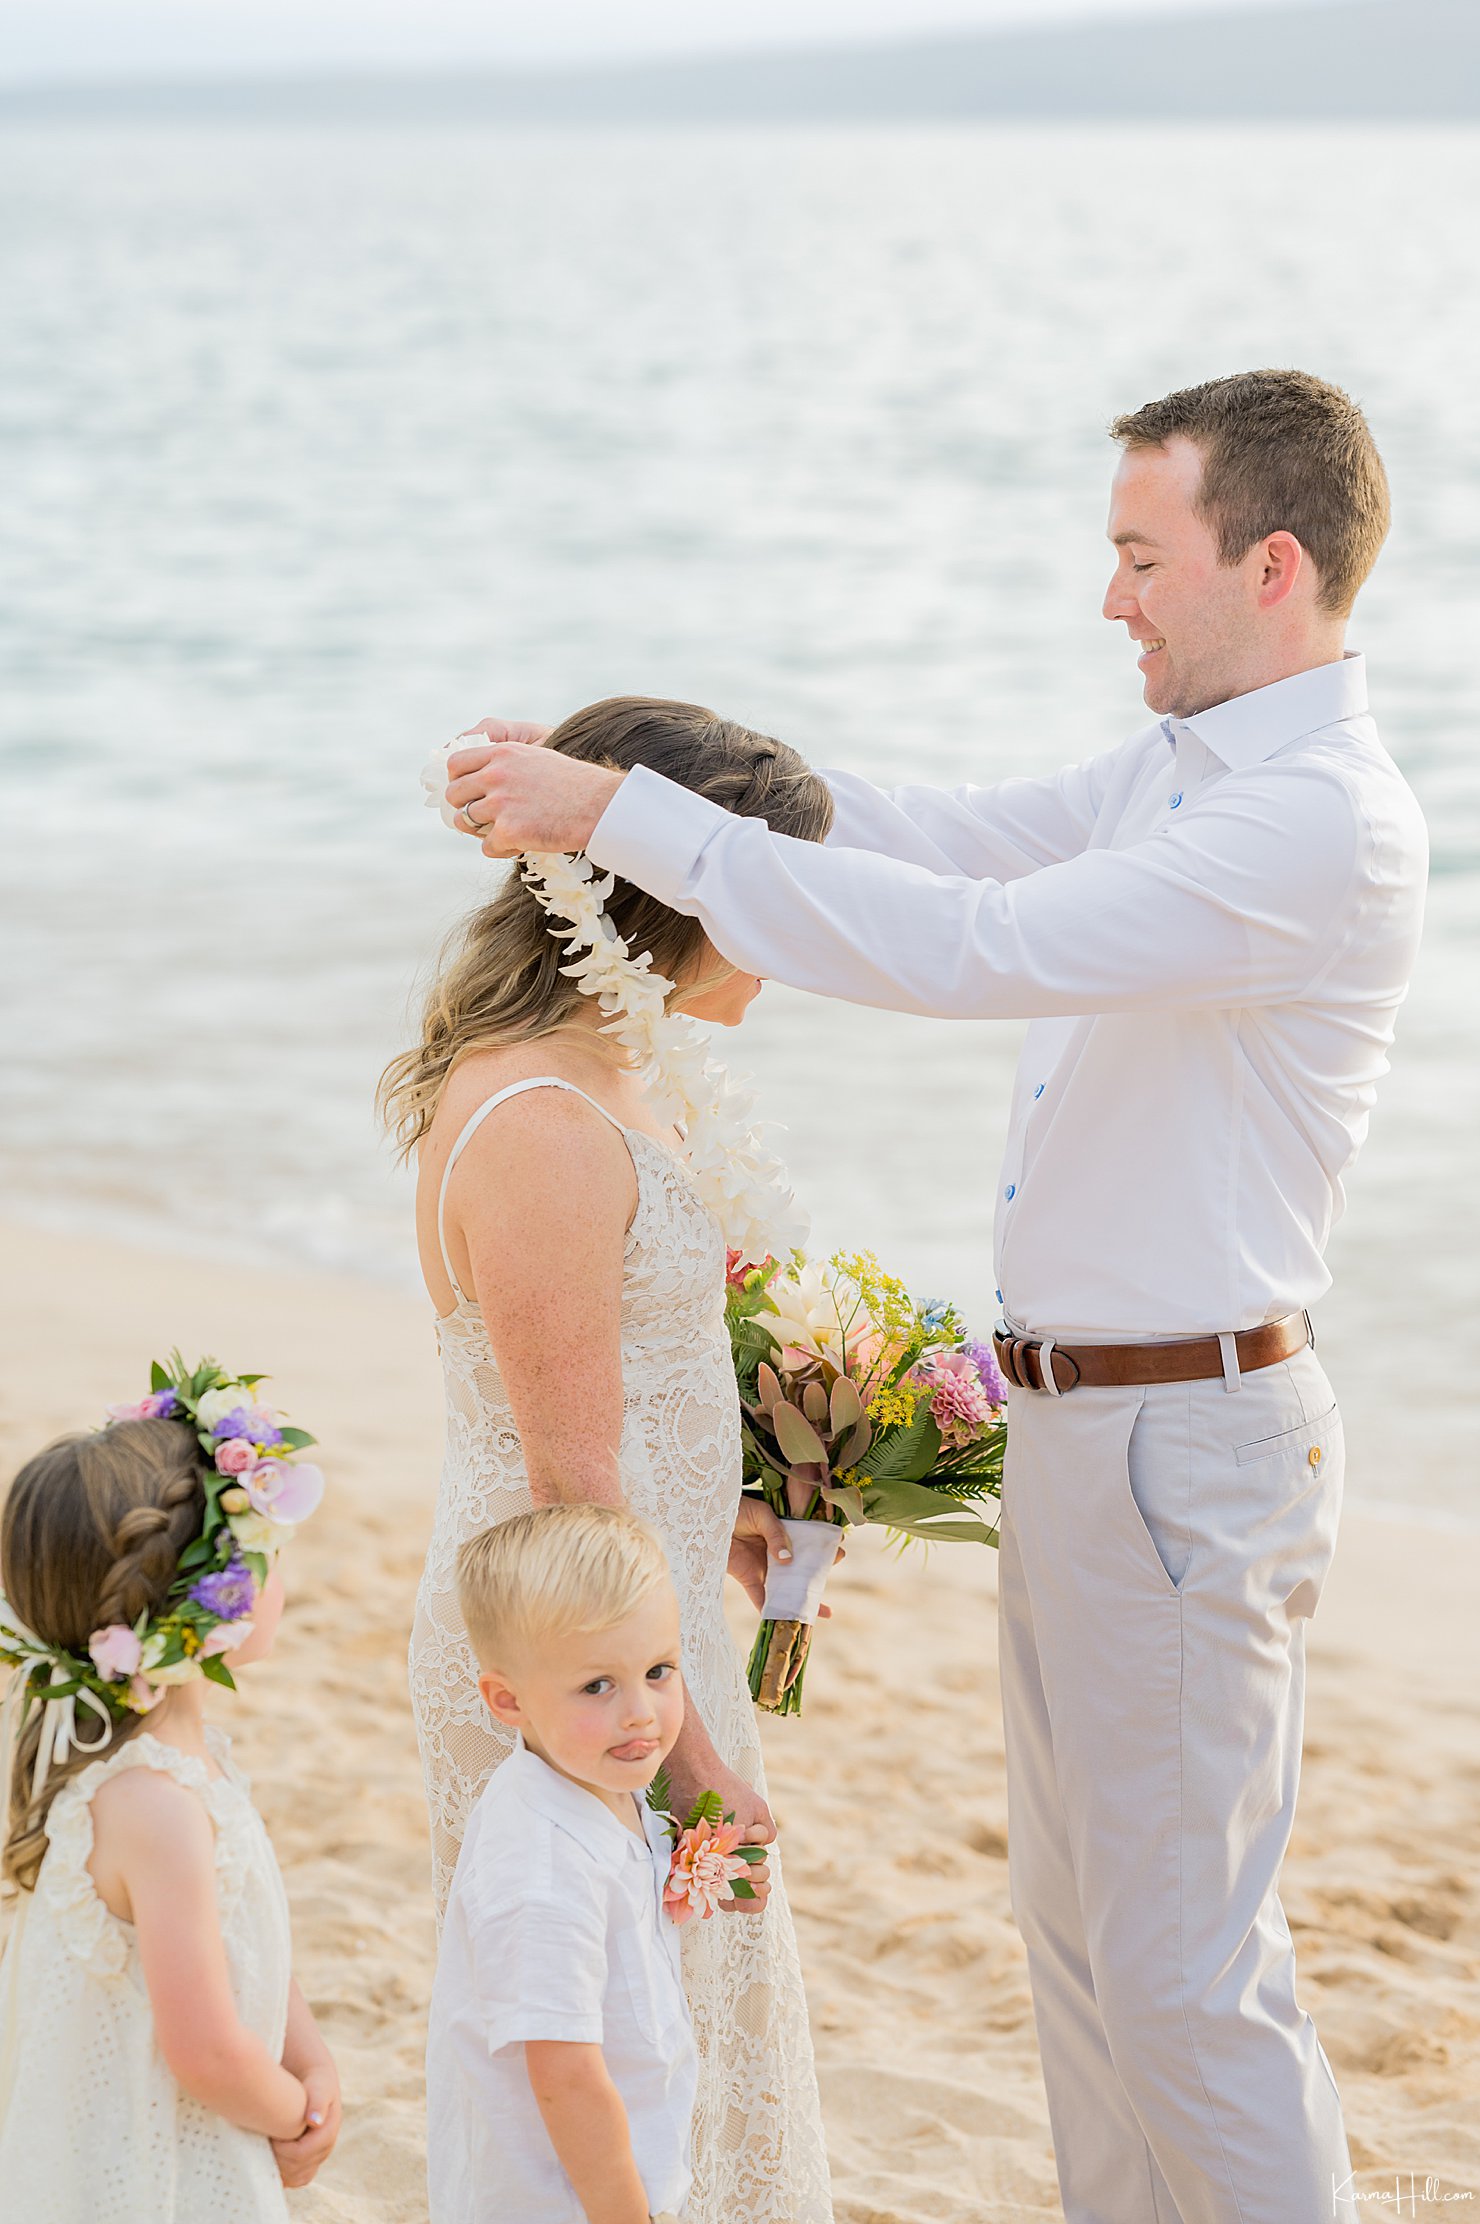 Hawaii vow renewals on the beach